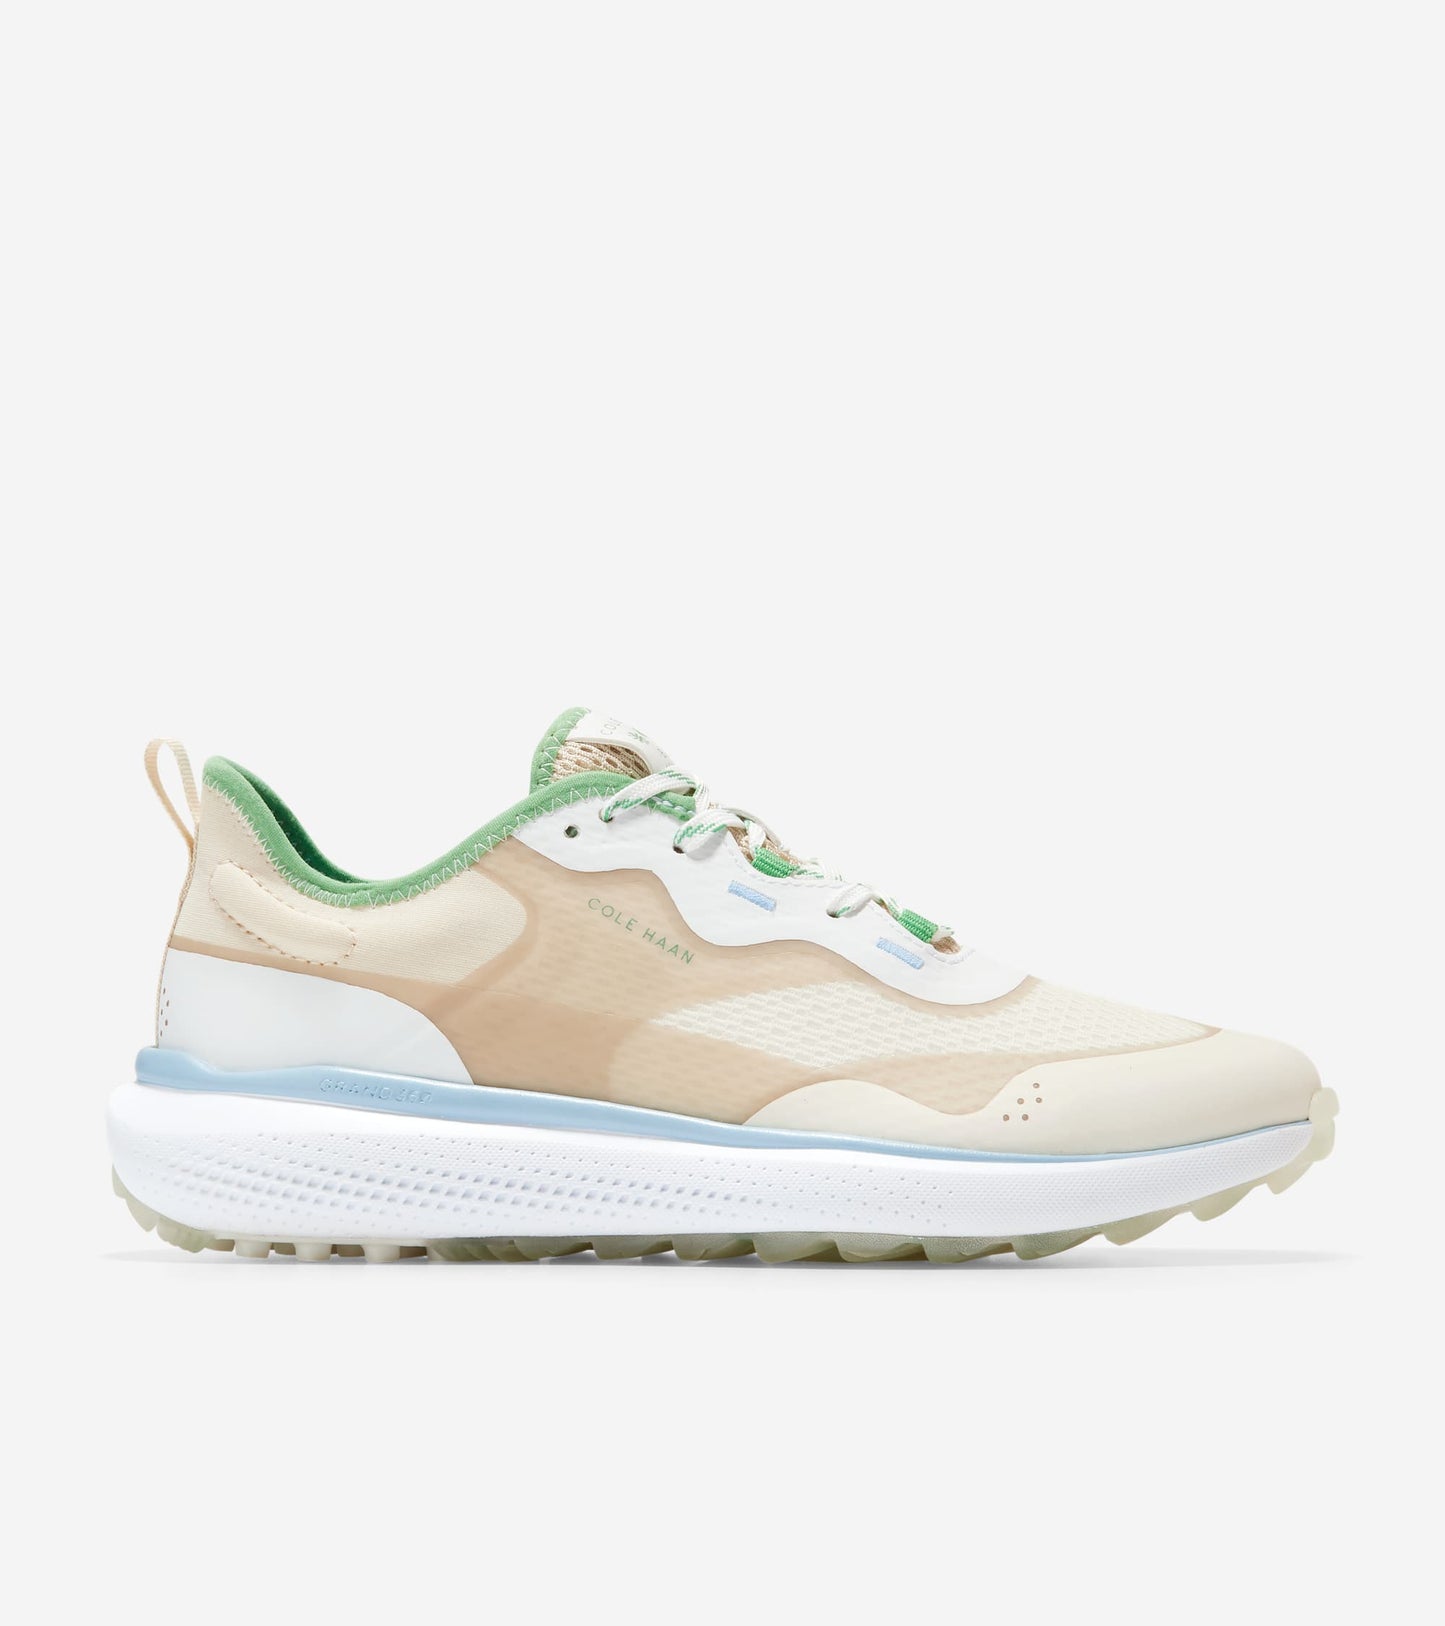 W29018:IVORY/BLEACHED SAND/BLUE BELL/GREENBRIAR/WHITE (7960018649335)